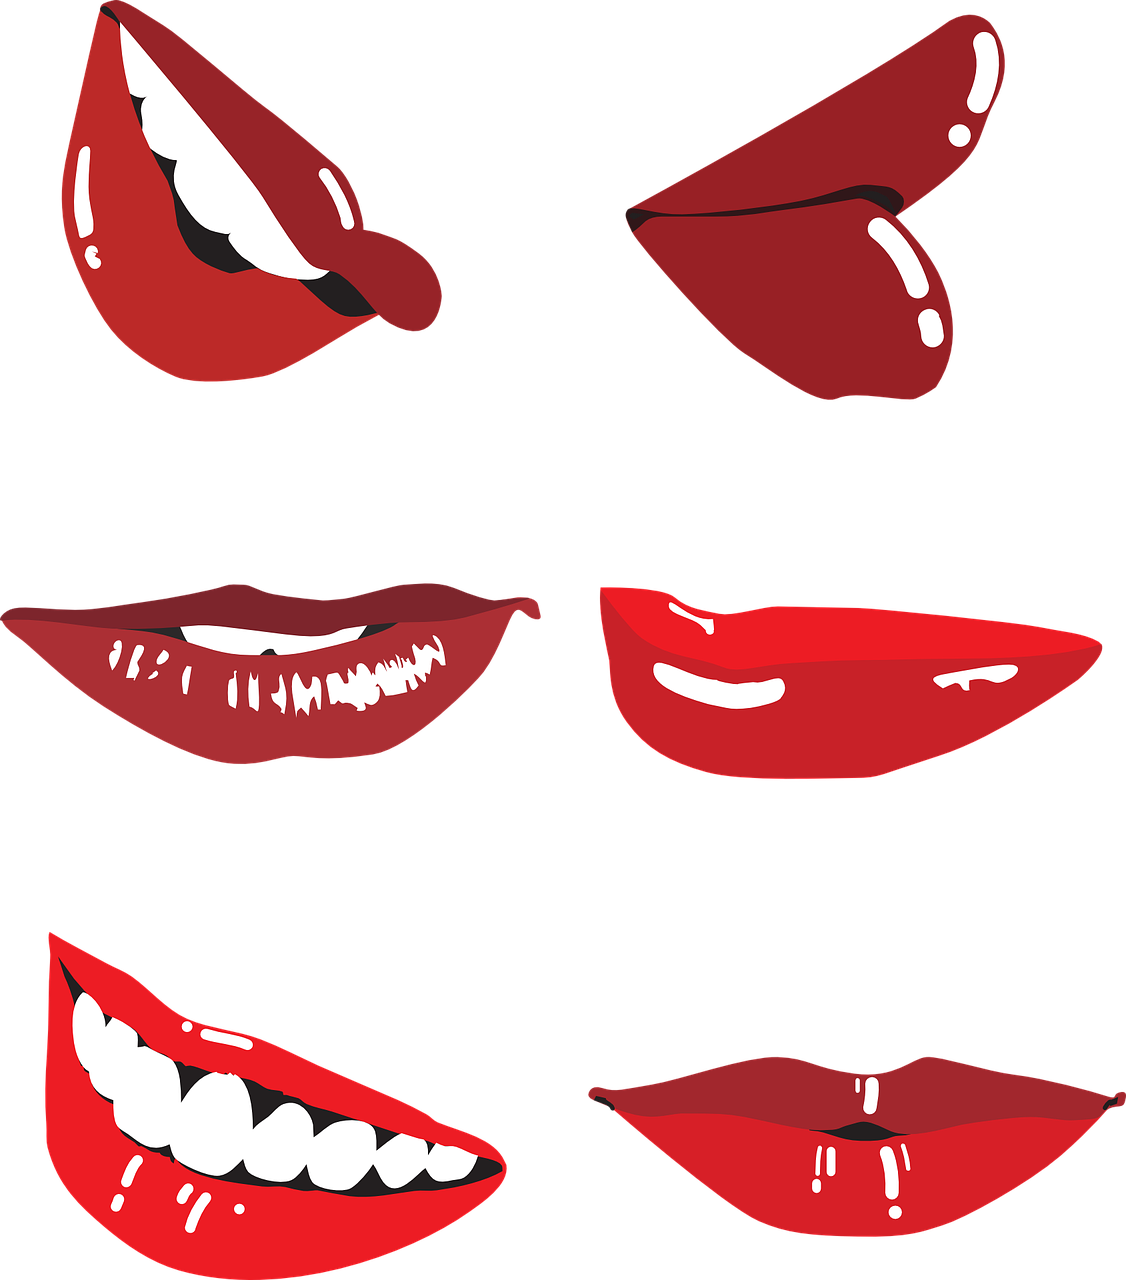 Varietyof Cartoon Mouth Expressions PNG